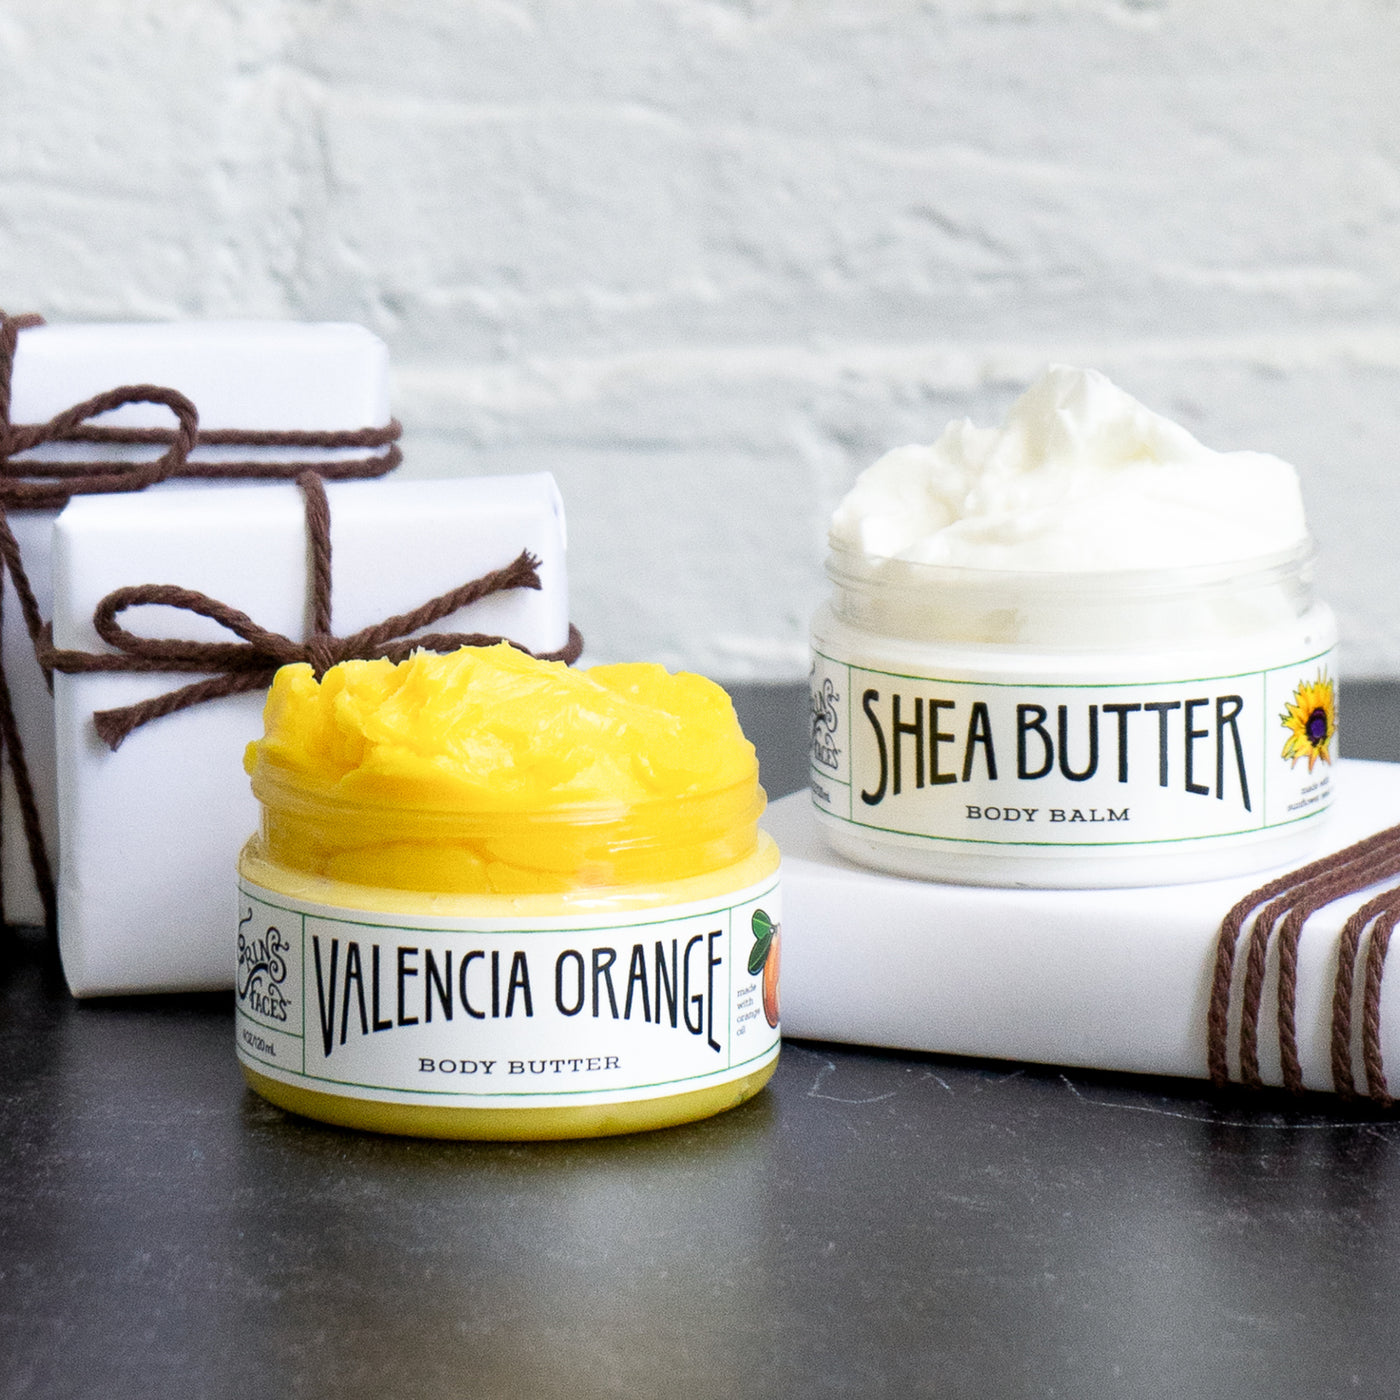 valencia orange and shea butter body balms next to white presents with brown string